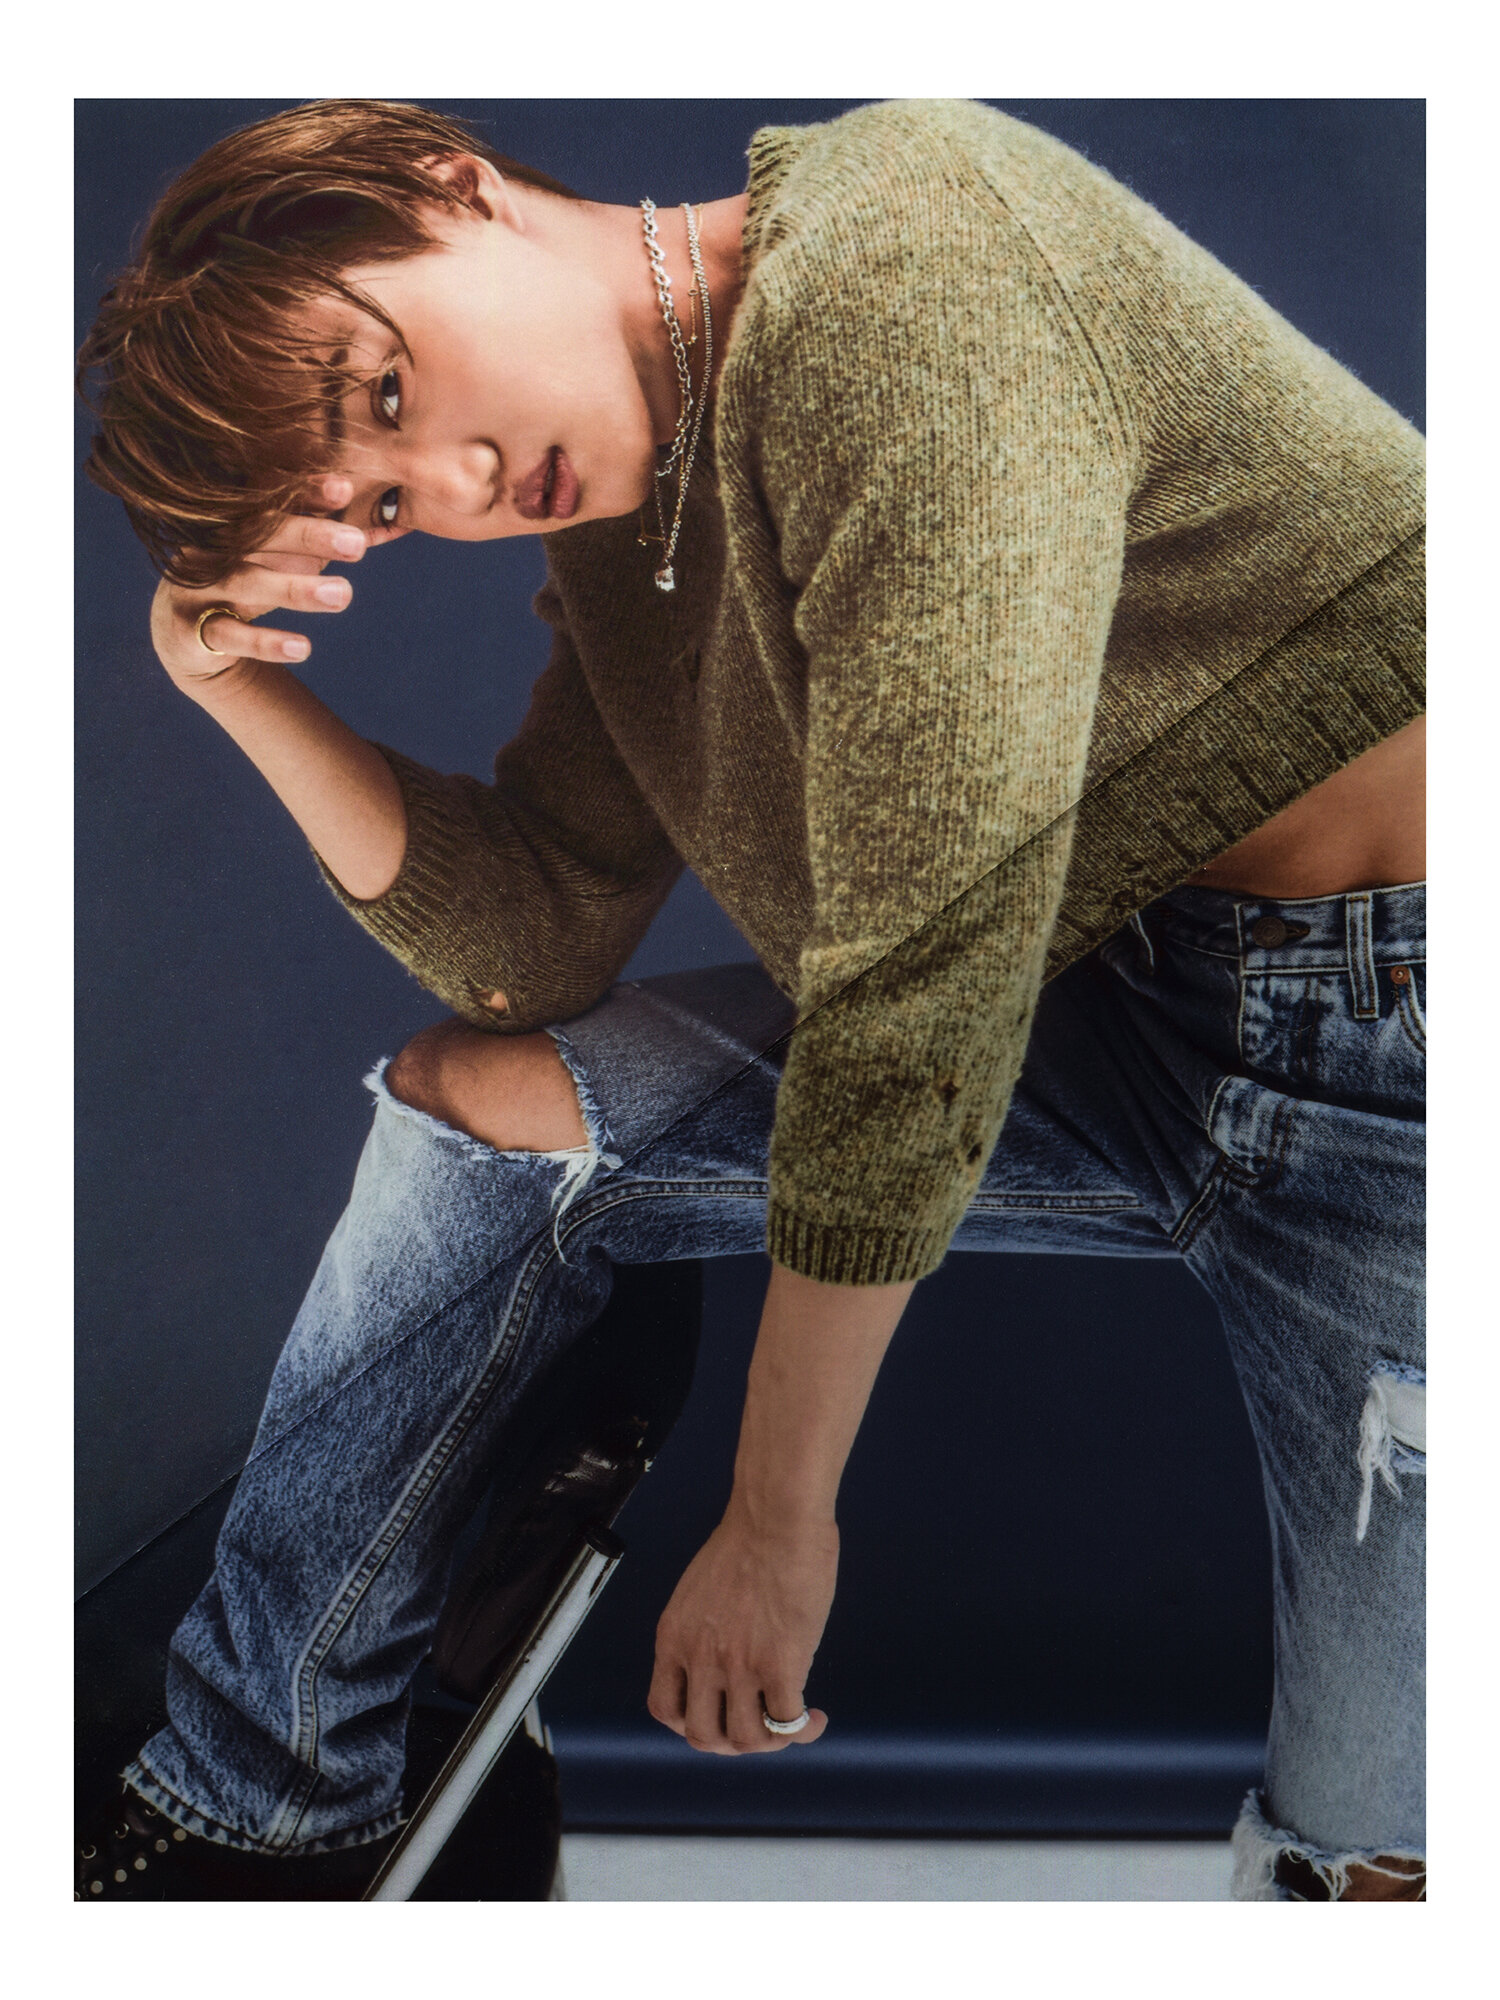 Kai wears GUCCI sweater, jeans and shoes. ISABELLA ETOU necklaces.